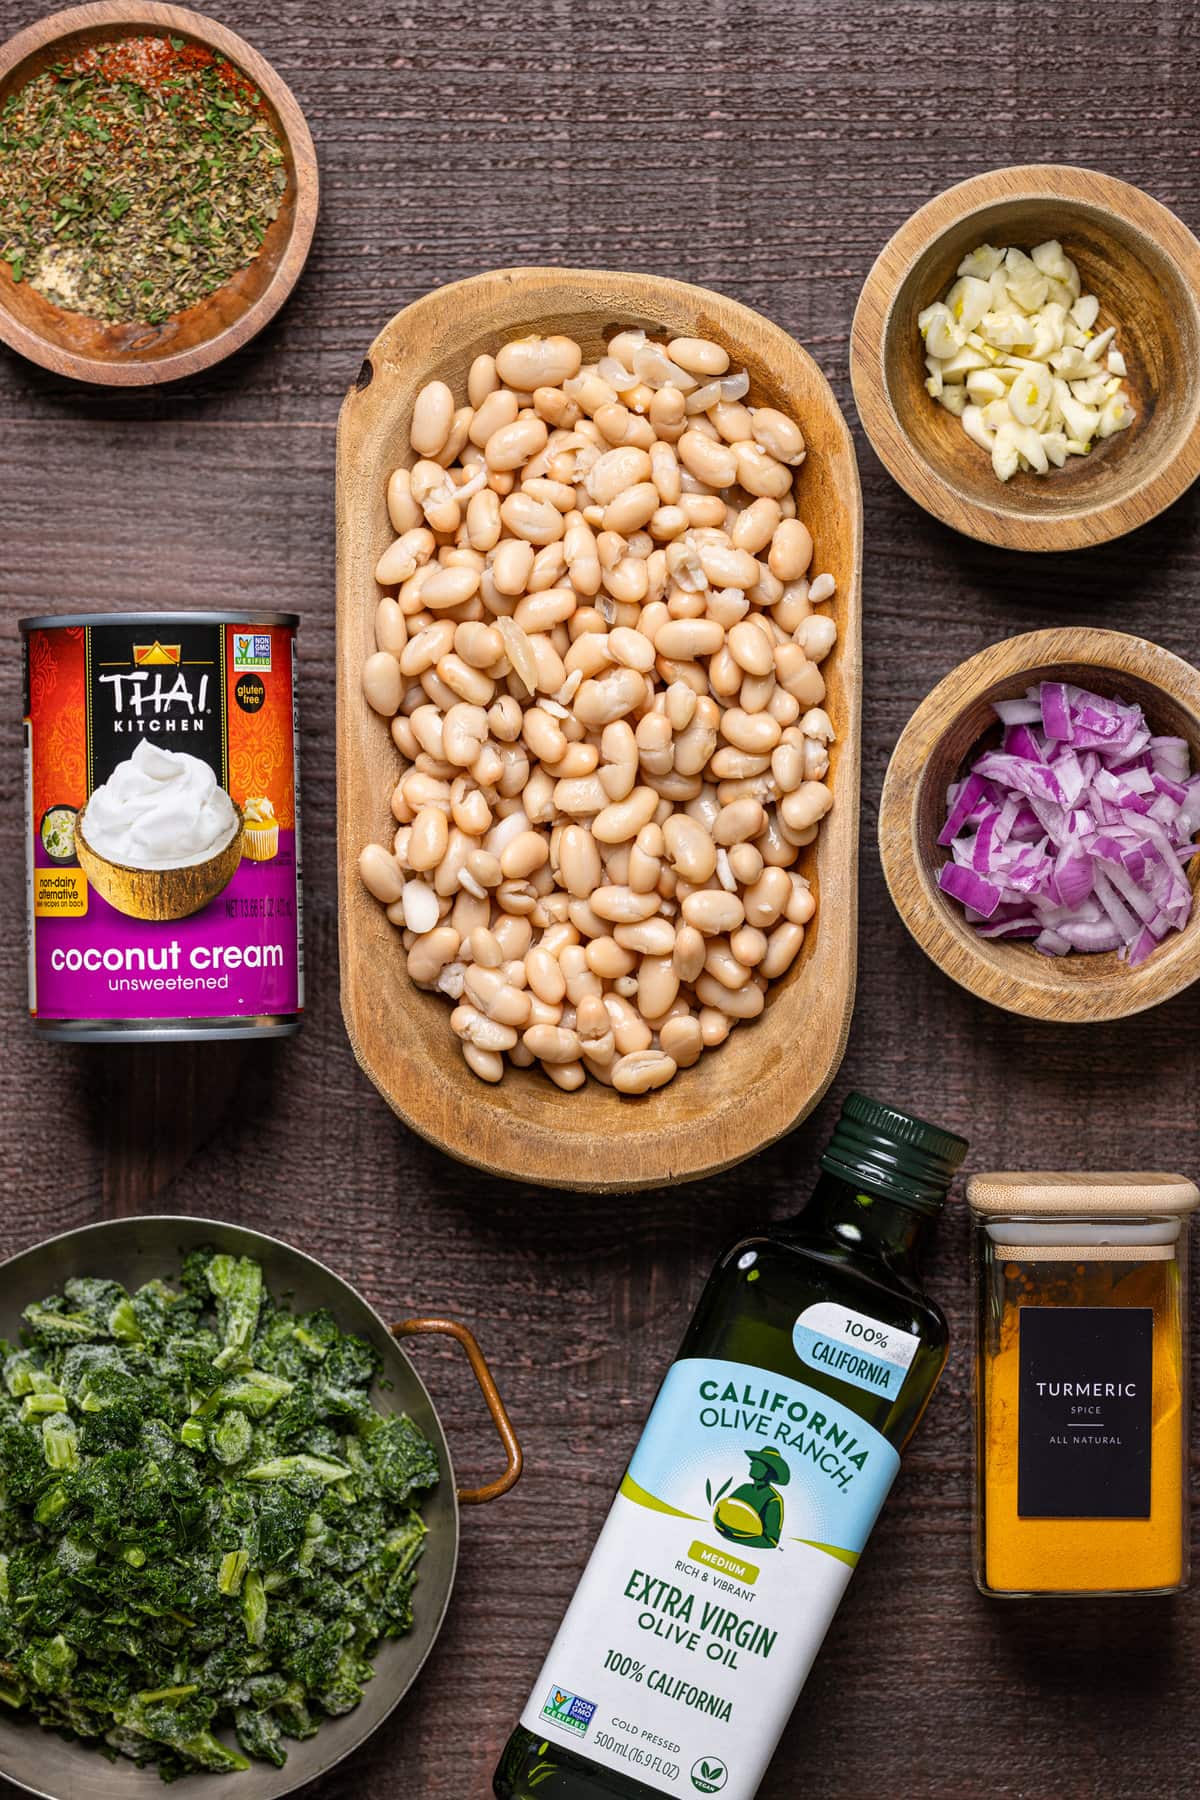 Ingredients for Creamy Vegan White Bean Soup including coconut cream, red onion, and turmeric